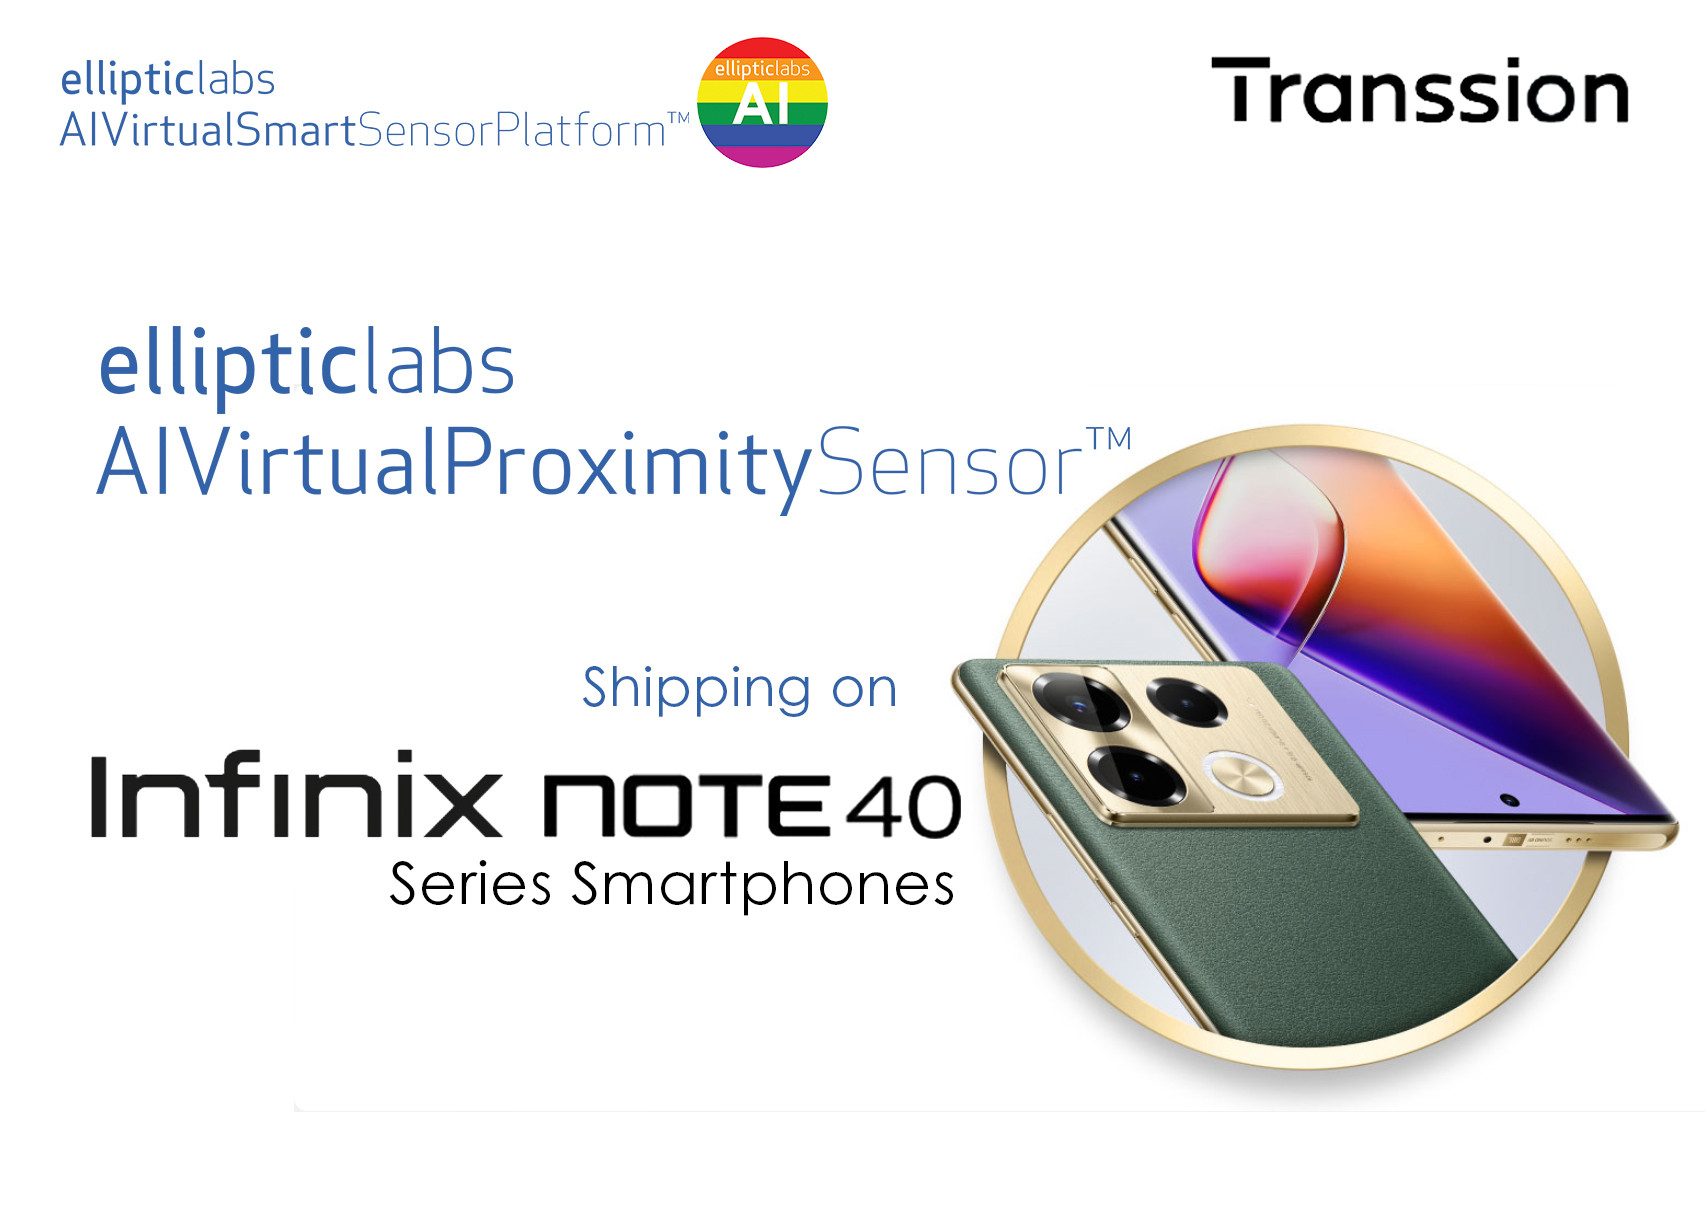 Elliptic Labs Chosen for Transsion’s Infinix Note 40 Series Smartphones